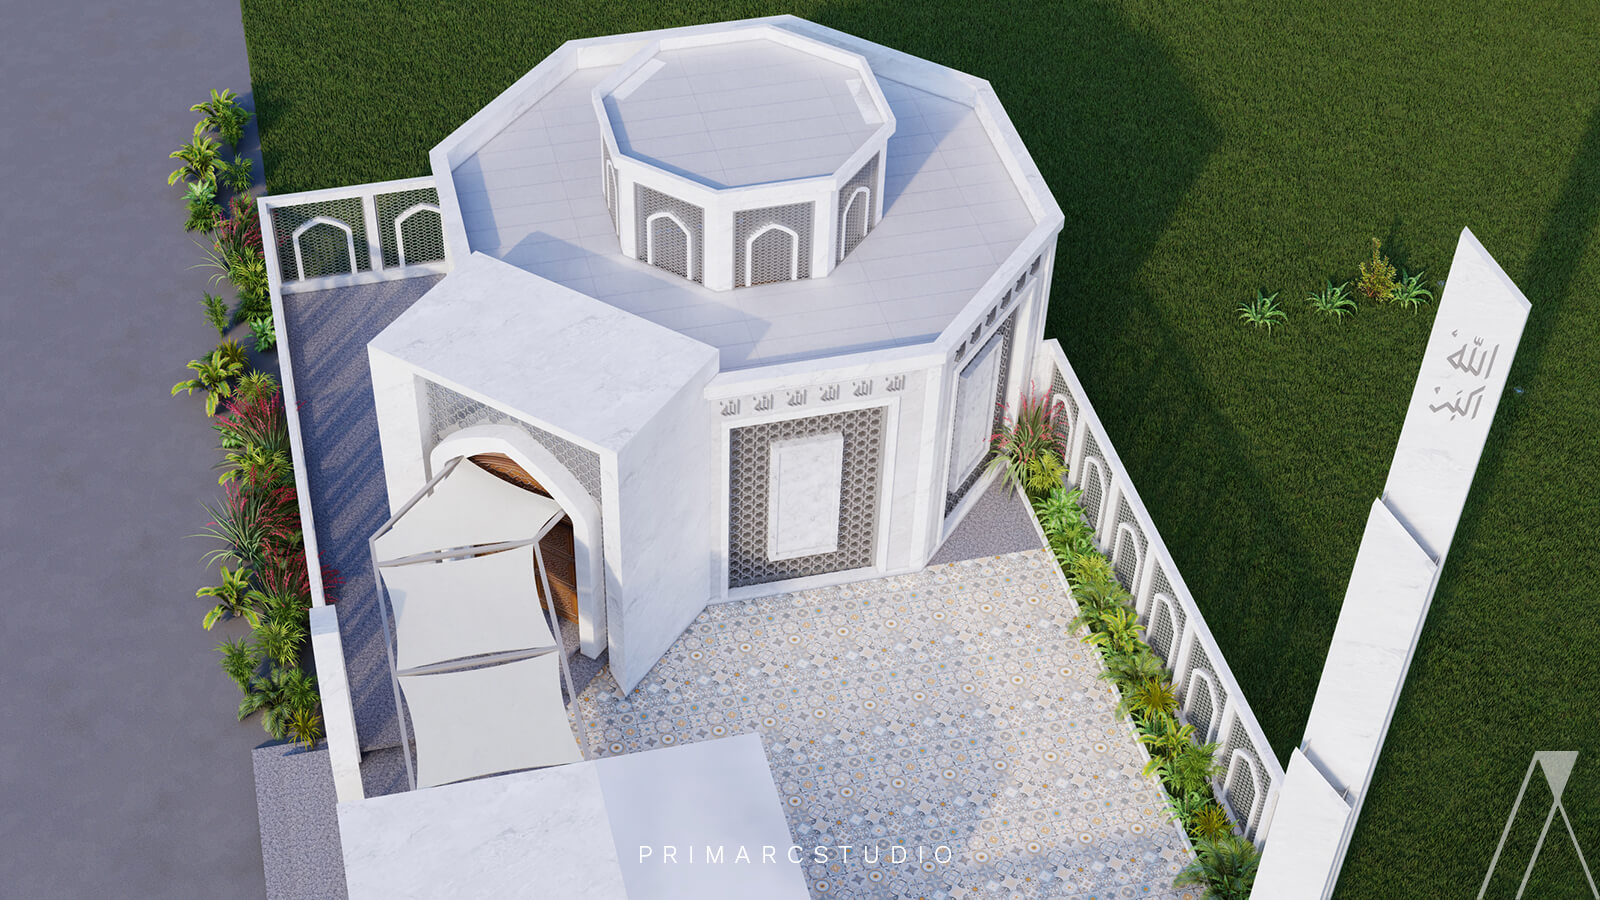 Majid exterior design in white with calligraphy in aerial view